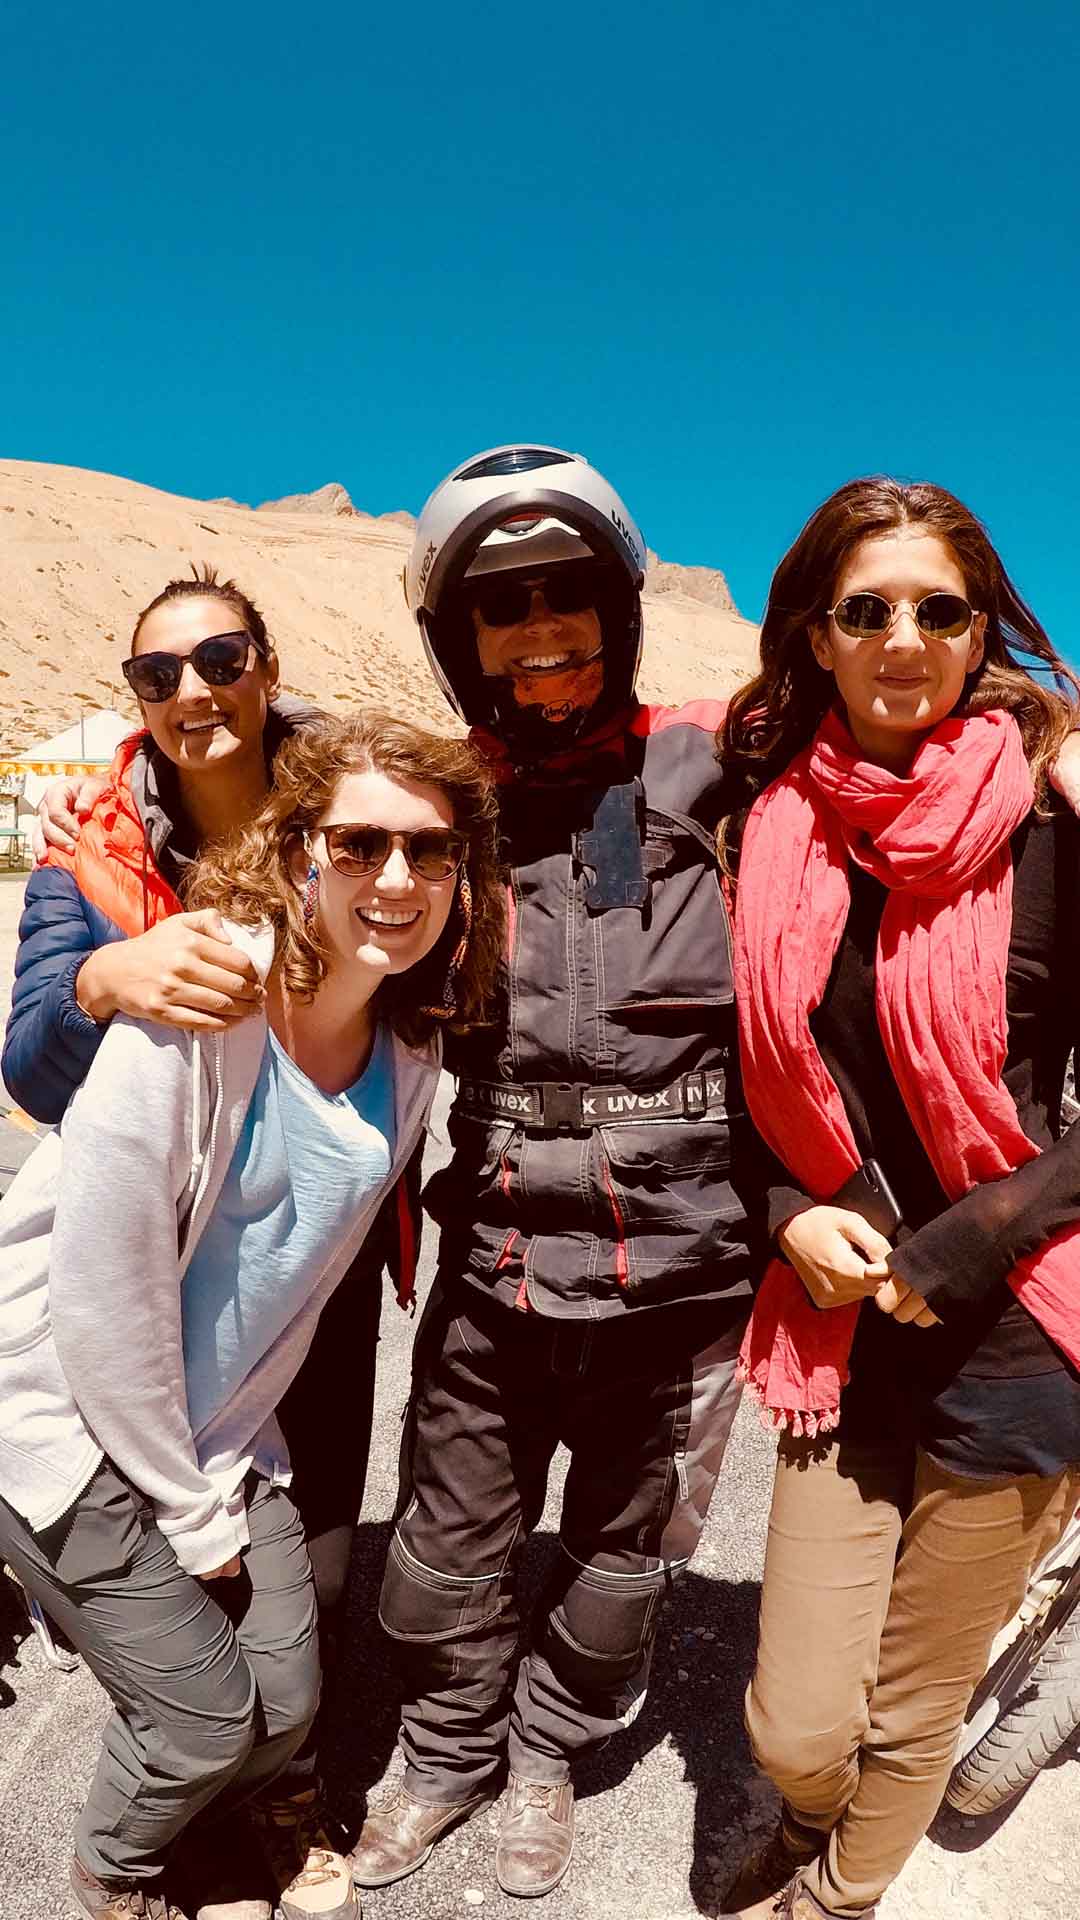 Meet your travel buddies on a motorcycle adventure tour to the Himalayas I Motorcycle journey to Indian Himalayas Tour, 2023